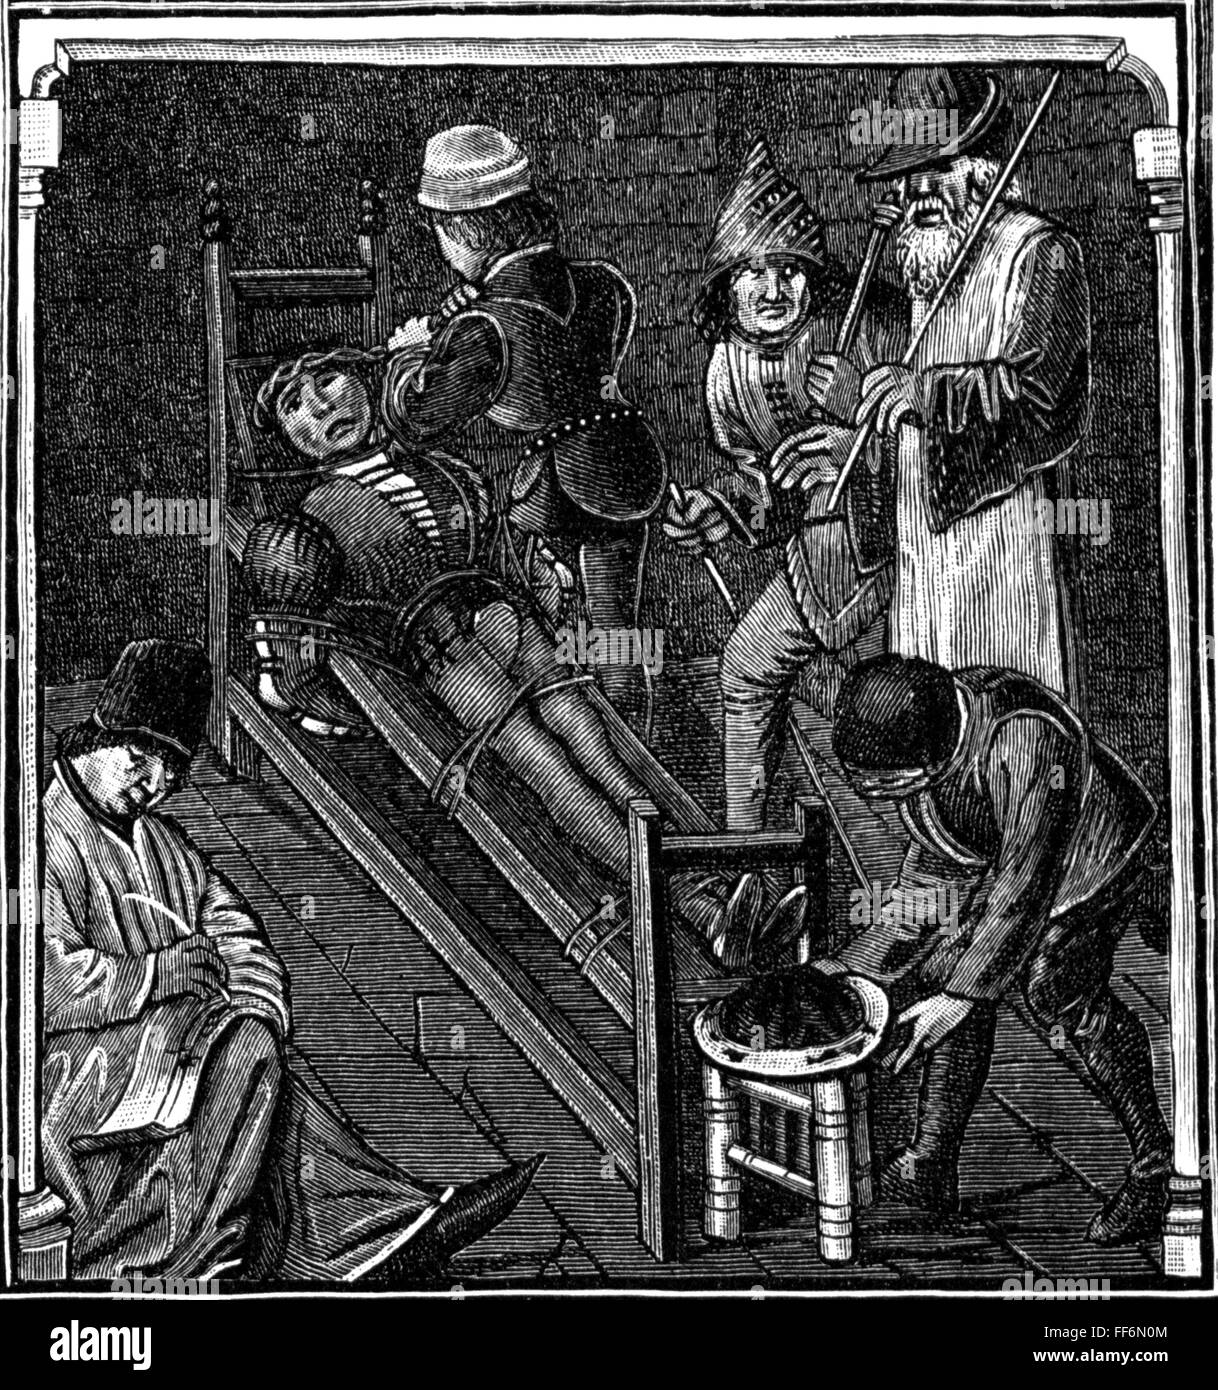 justice, torture, interrogation in the torture chamber, after miniature, from: Valerius Maximus, 'Factorum et dictorum memorabilium', 15th century, city library Wroclaw, wood engraving, 19th century, Additional-Rights-Clearences-Not Available Stock Photo